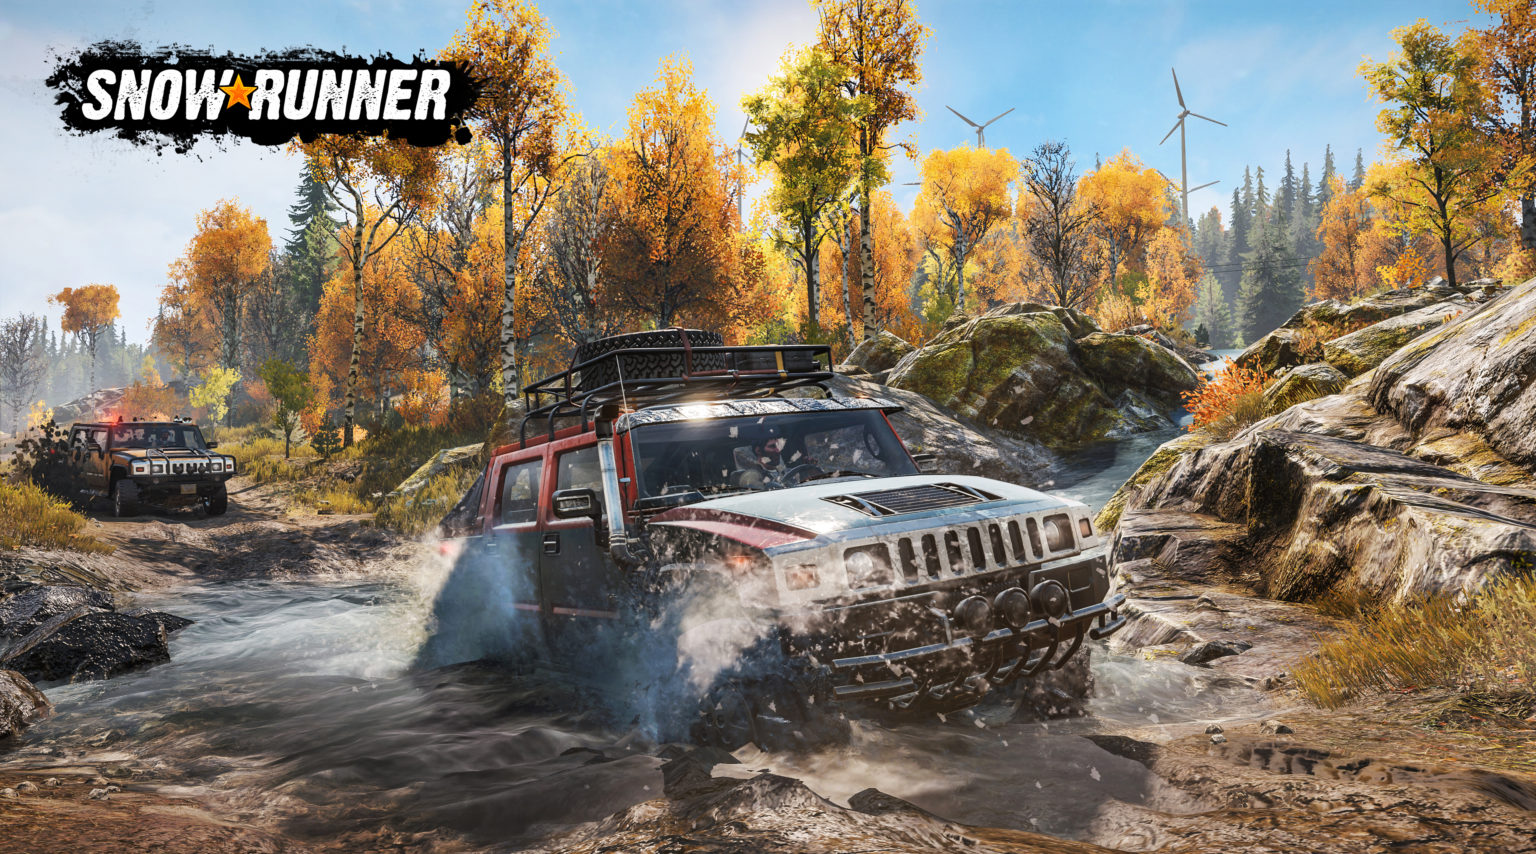 ps4 mudrunner review